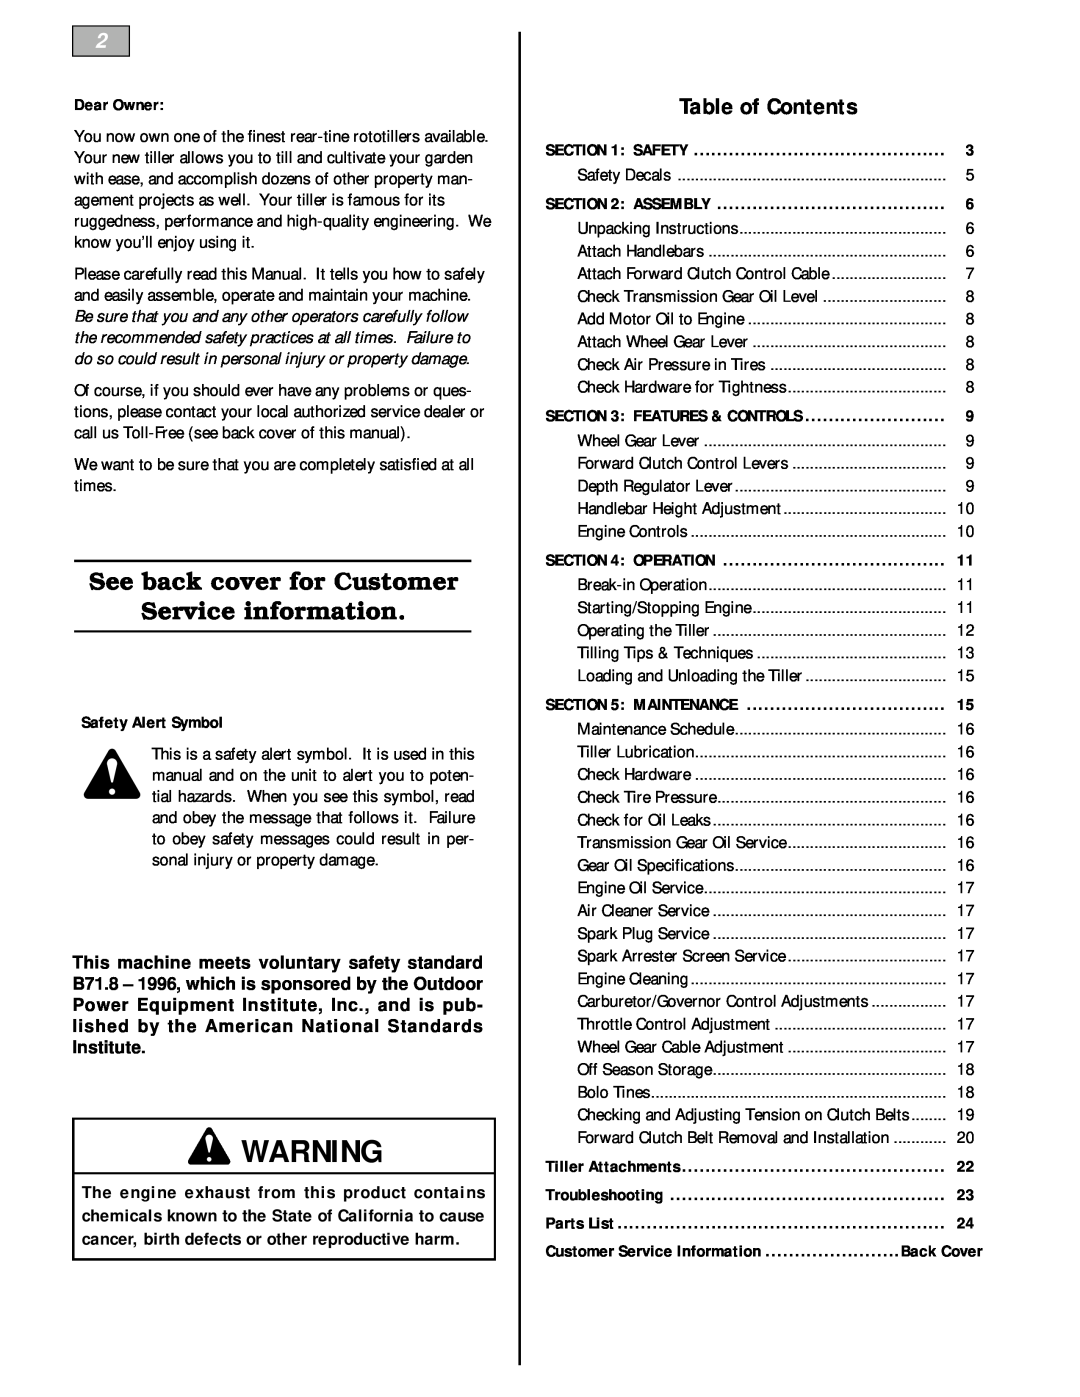 Bolens 12226 Table of Contents, Dear Owner, Safety Alert Symbol, Tiller Attachments, Troubleshooting, Parts List, Assembly 